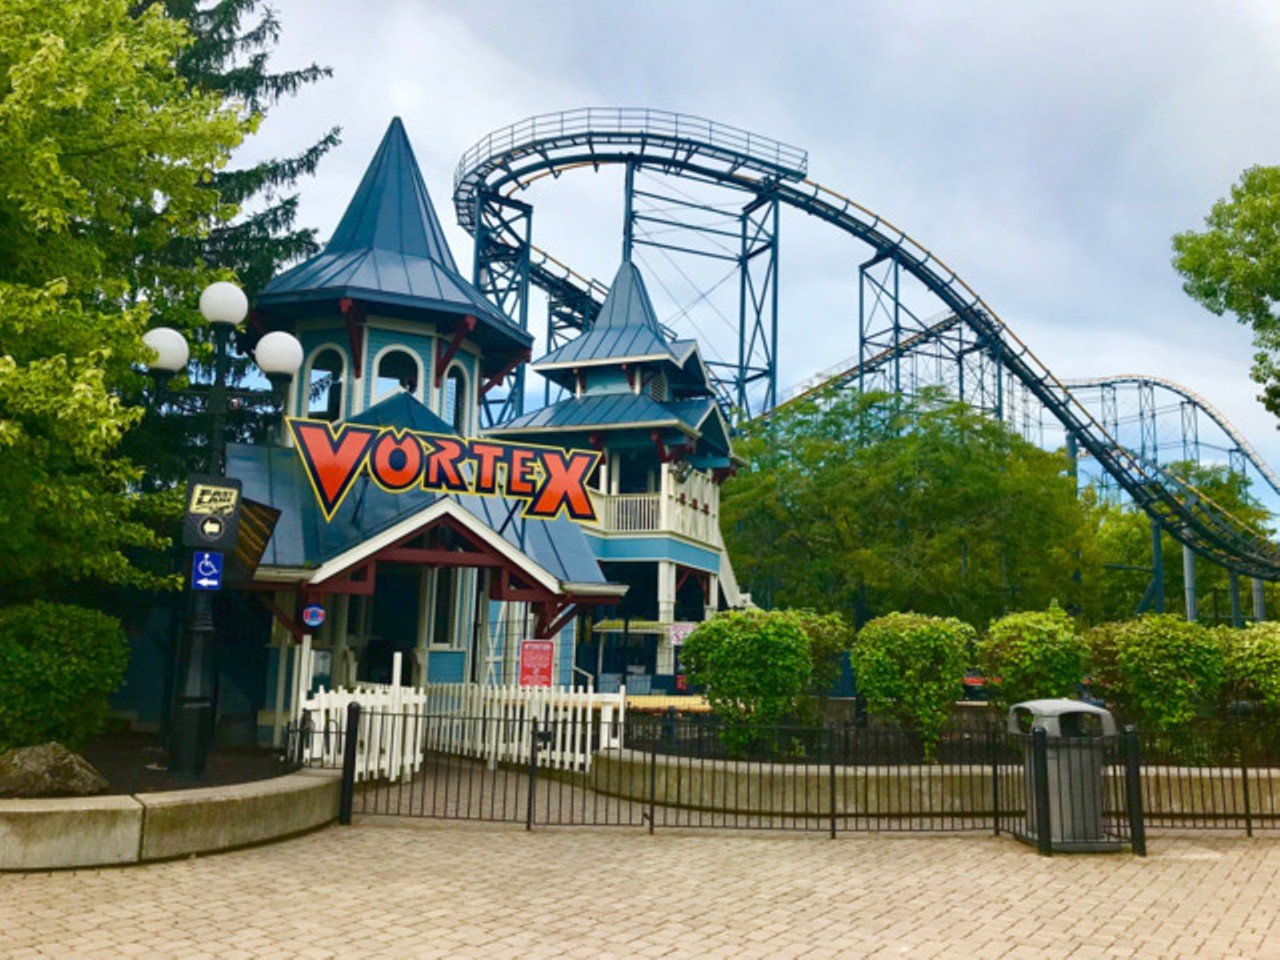  Kings Island's Vortex Is Sinking 
Many coaster freaks have heard that the Vortex is sinking into the ground because Kings Island is built almost entirely on a swamp. Many say this rumor started as an April Fools joke in the 1990s. This urban legend is now a nonissue, given the fact that the Vortex closed in 2019 (for mostly mechanical reasons, not because it had sank inches into the ground). Despite its closure, the Vortex remains a legend among easily persuaded kids who recently crossed the 48-inch height requirement to ride.